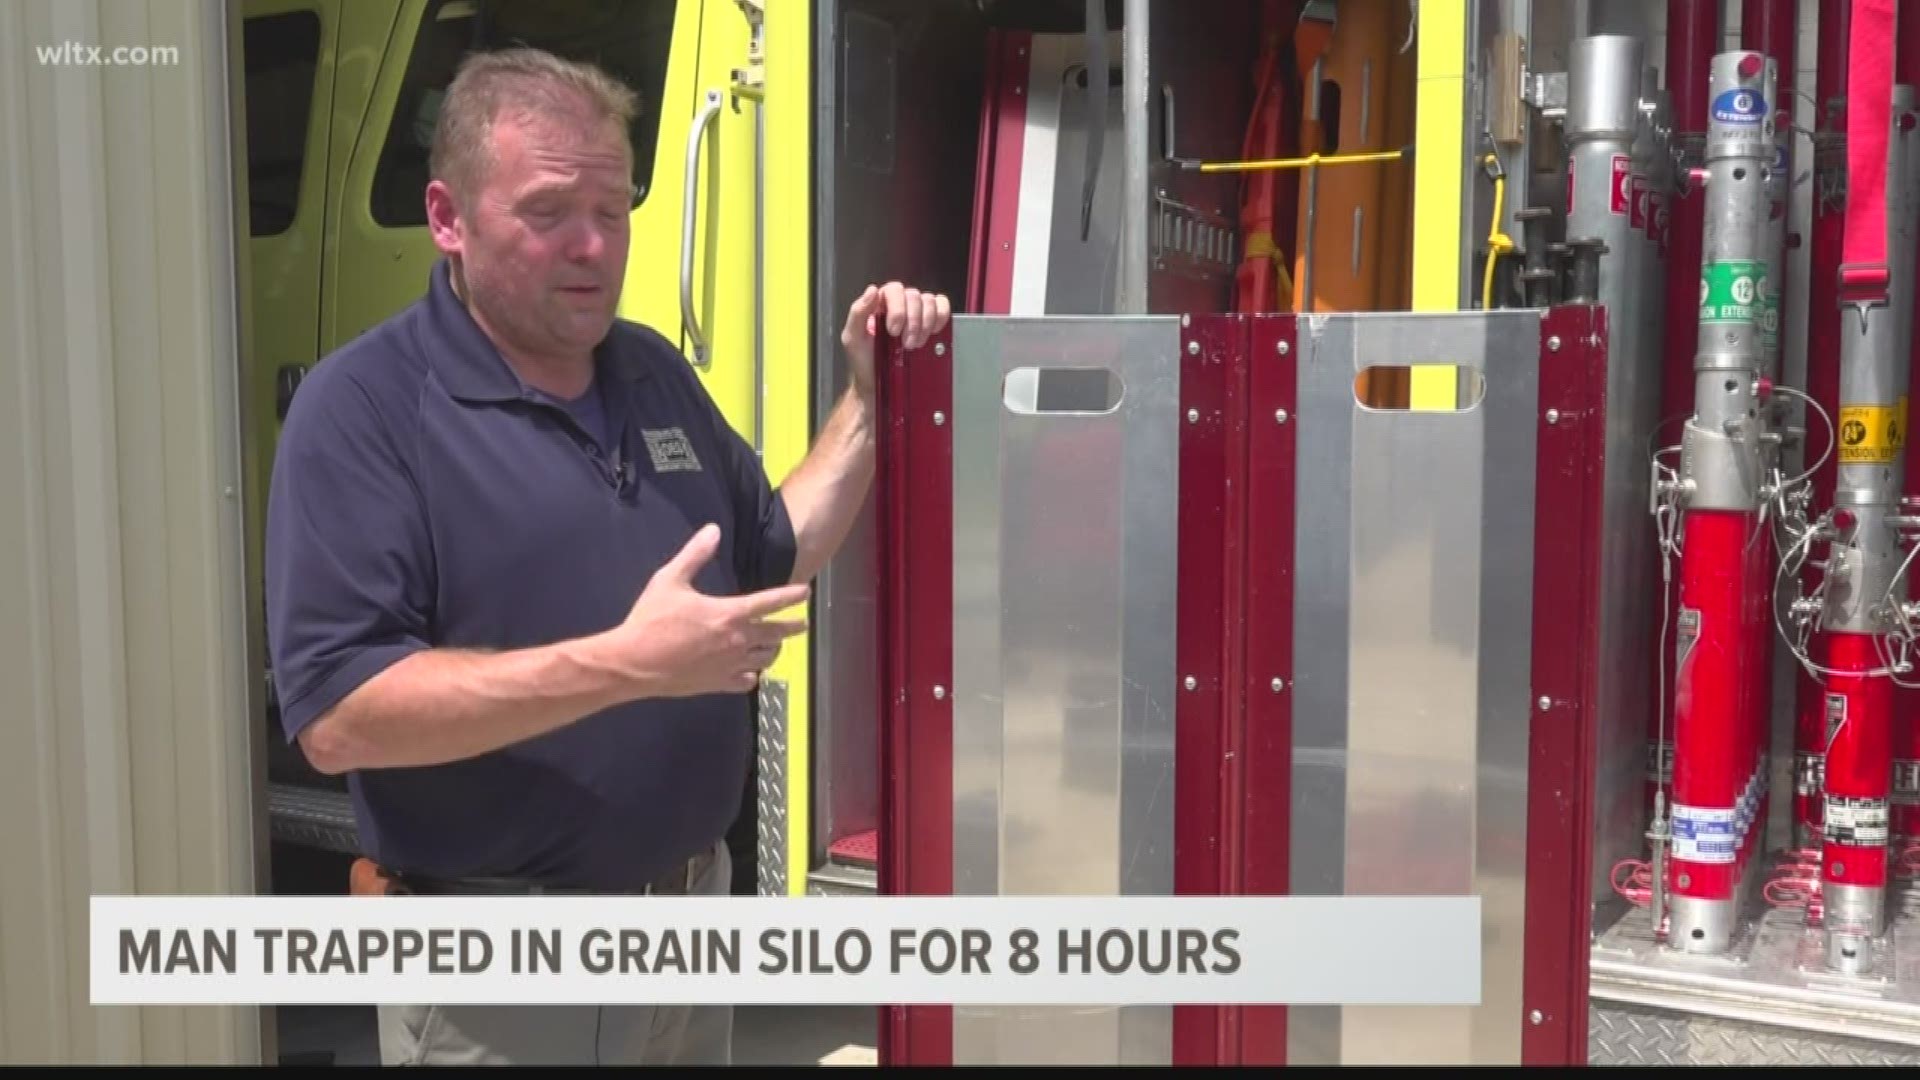 The fire department has panels that fit into a grain bin that will help to keep the grain off the person trapped inside.